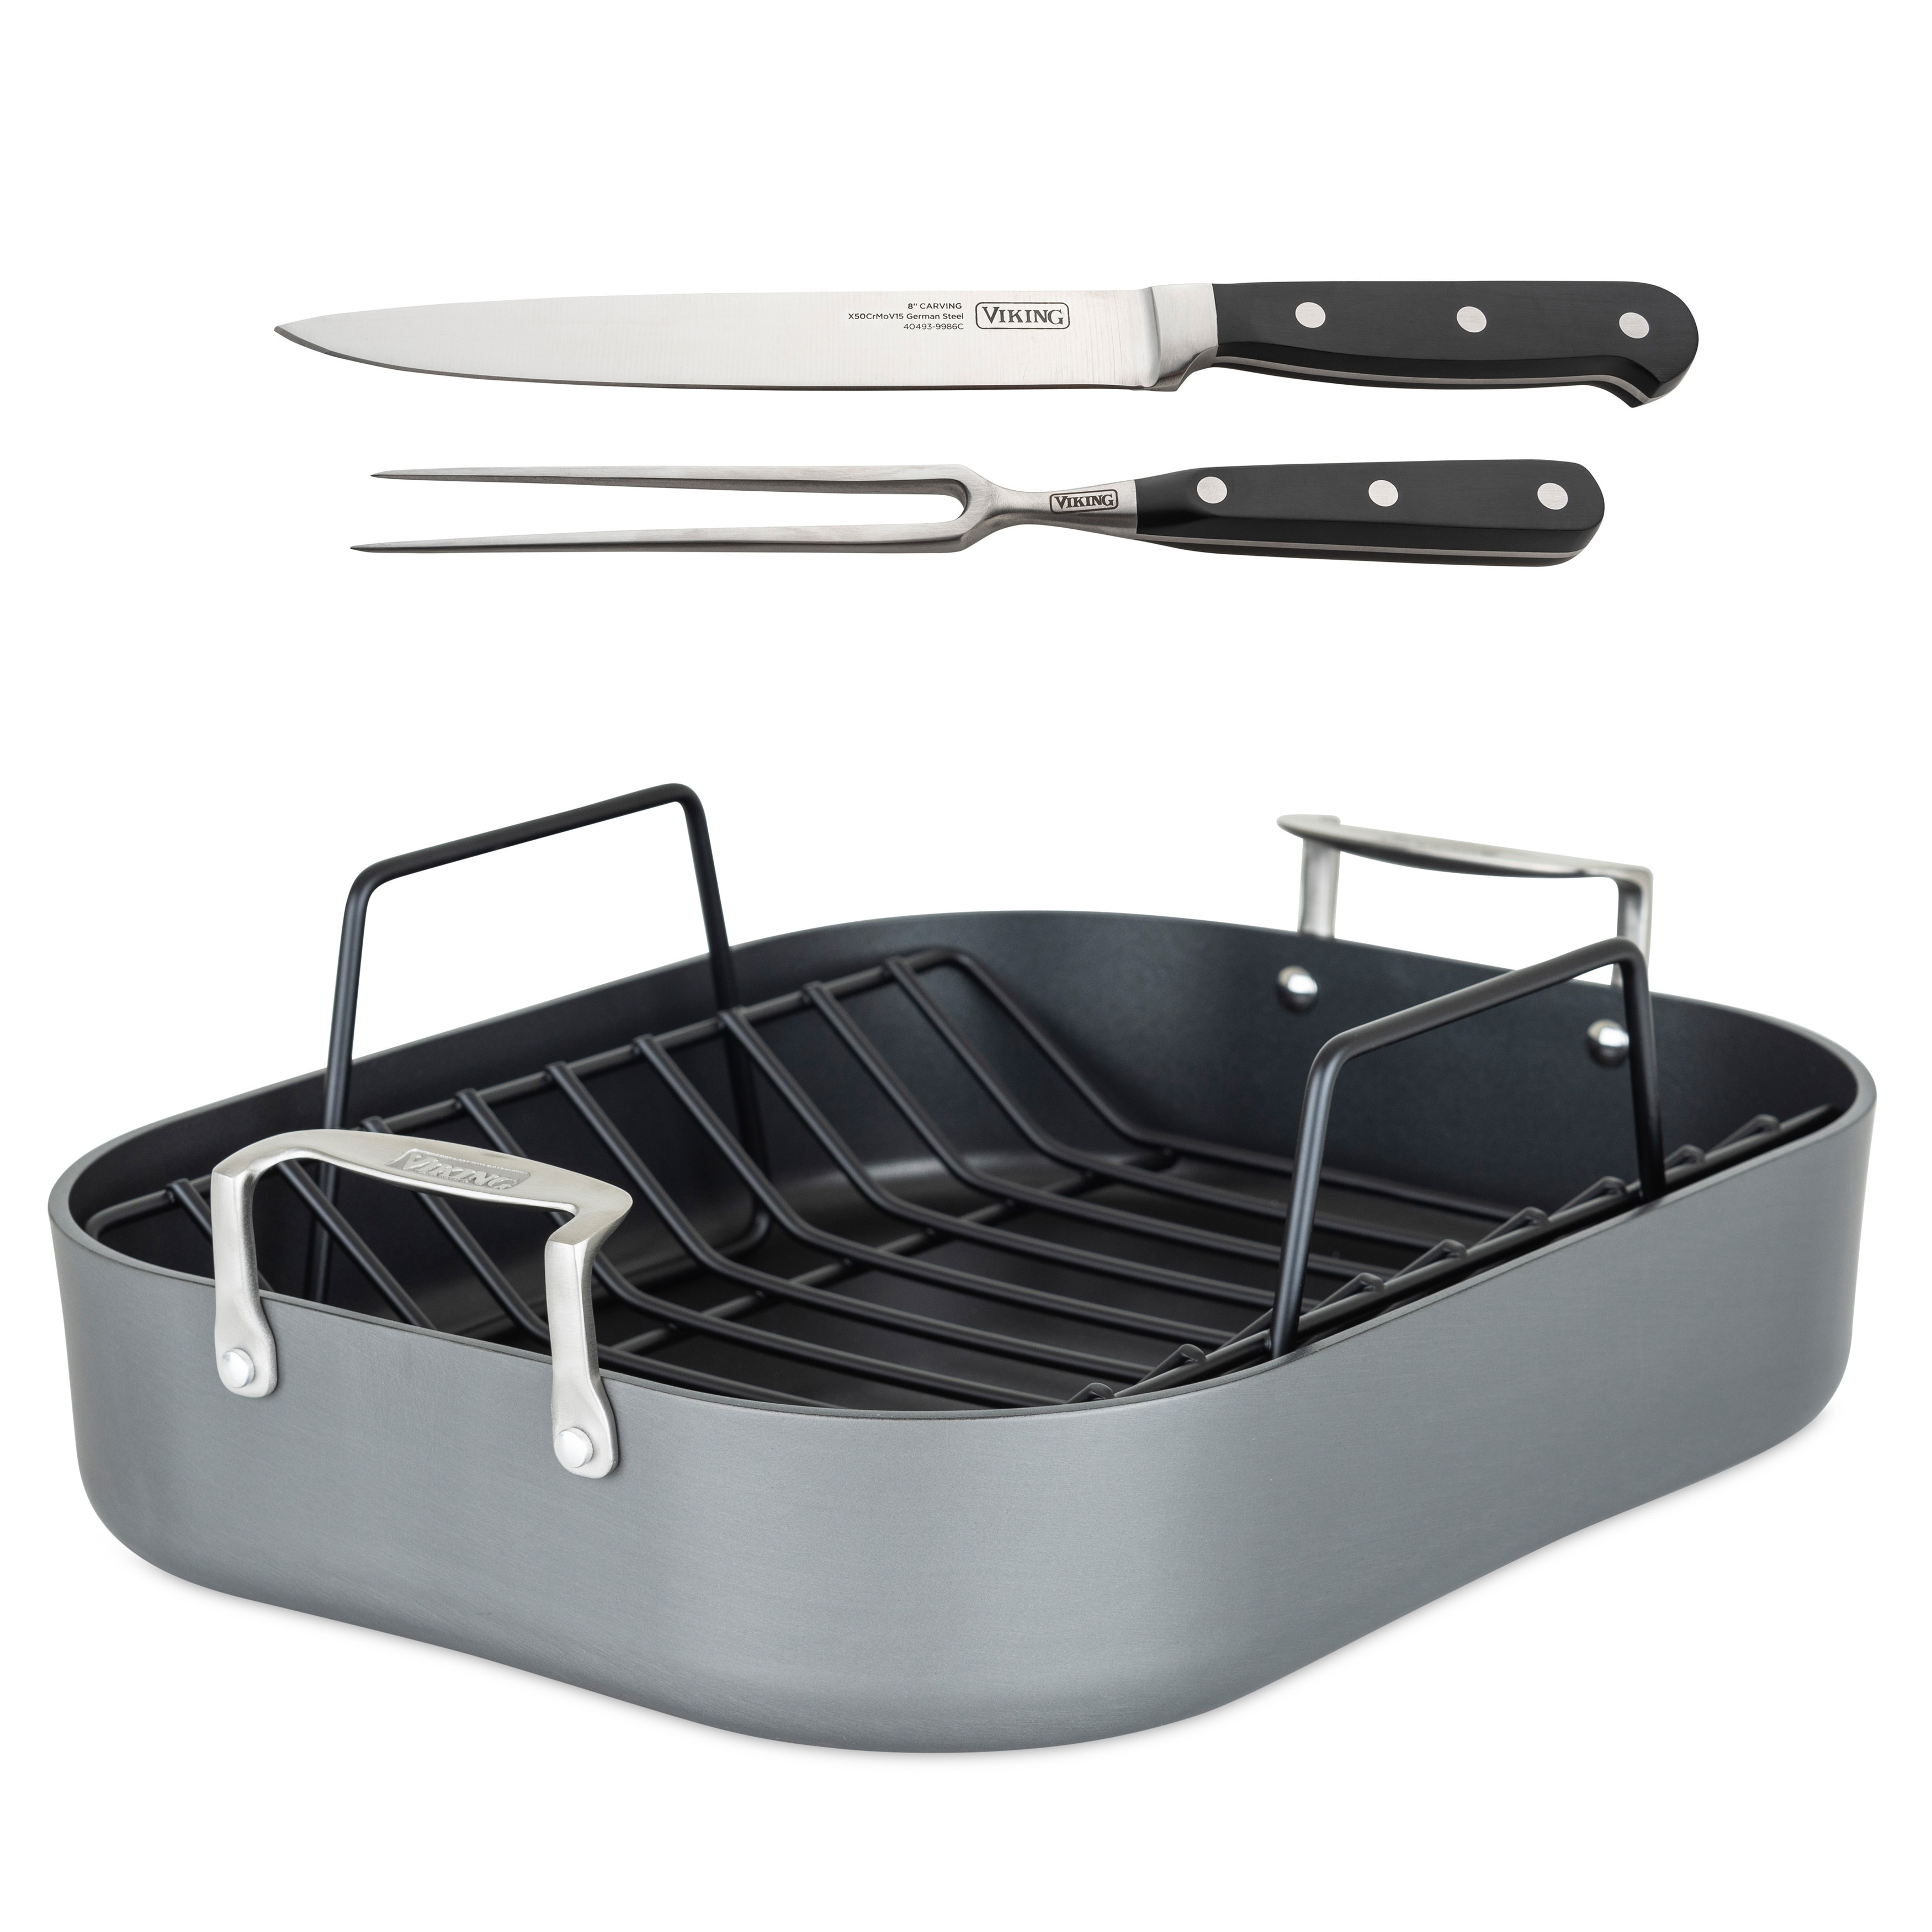 https://ak1.ostkcdn.com/images/products/is/images/direct/54259b6049edc02892089c0bcb18d018f3231ff3/Viking-Hard-Anodized-Nonstick-Roaster-with-Rack-and-Carving-Set-Included.jpg